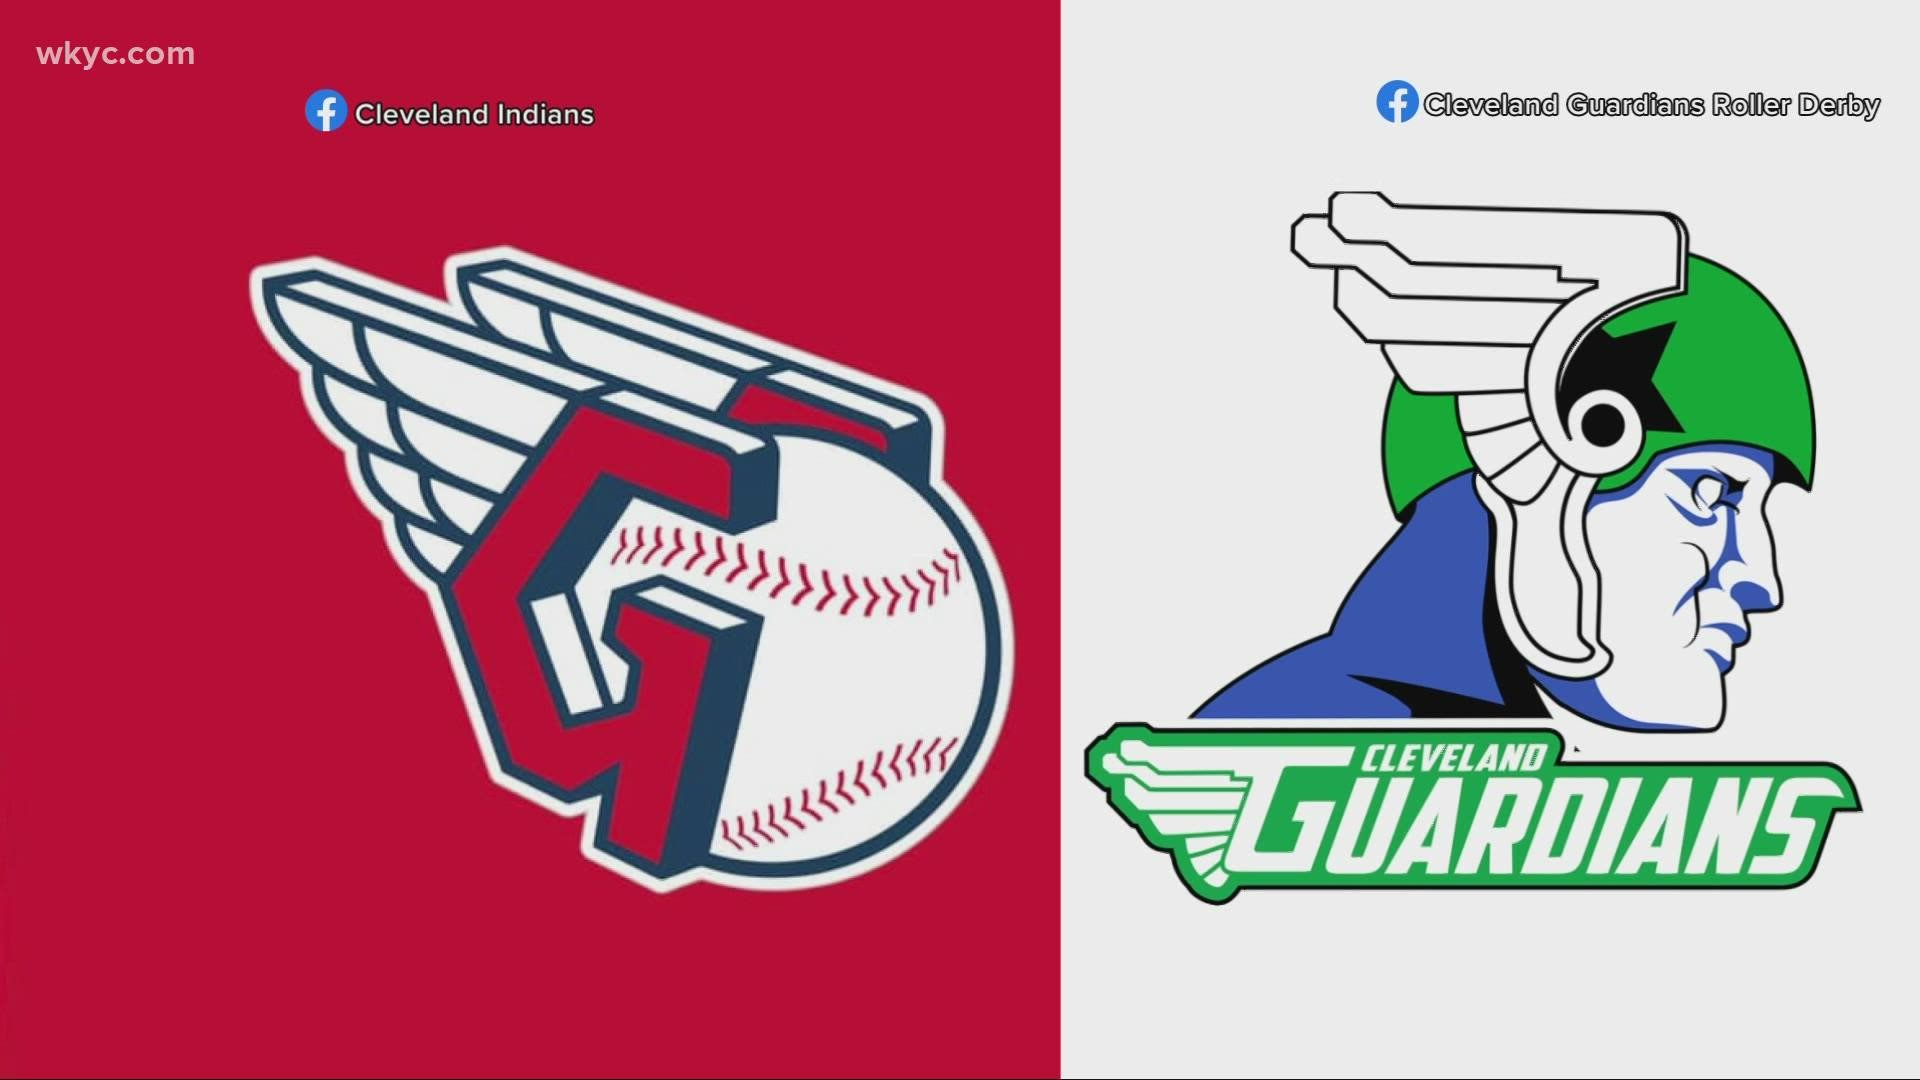 After months of speculation, the local professional baseball team in Cleveland will be able to officially use the name Guardians.